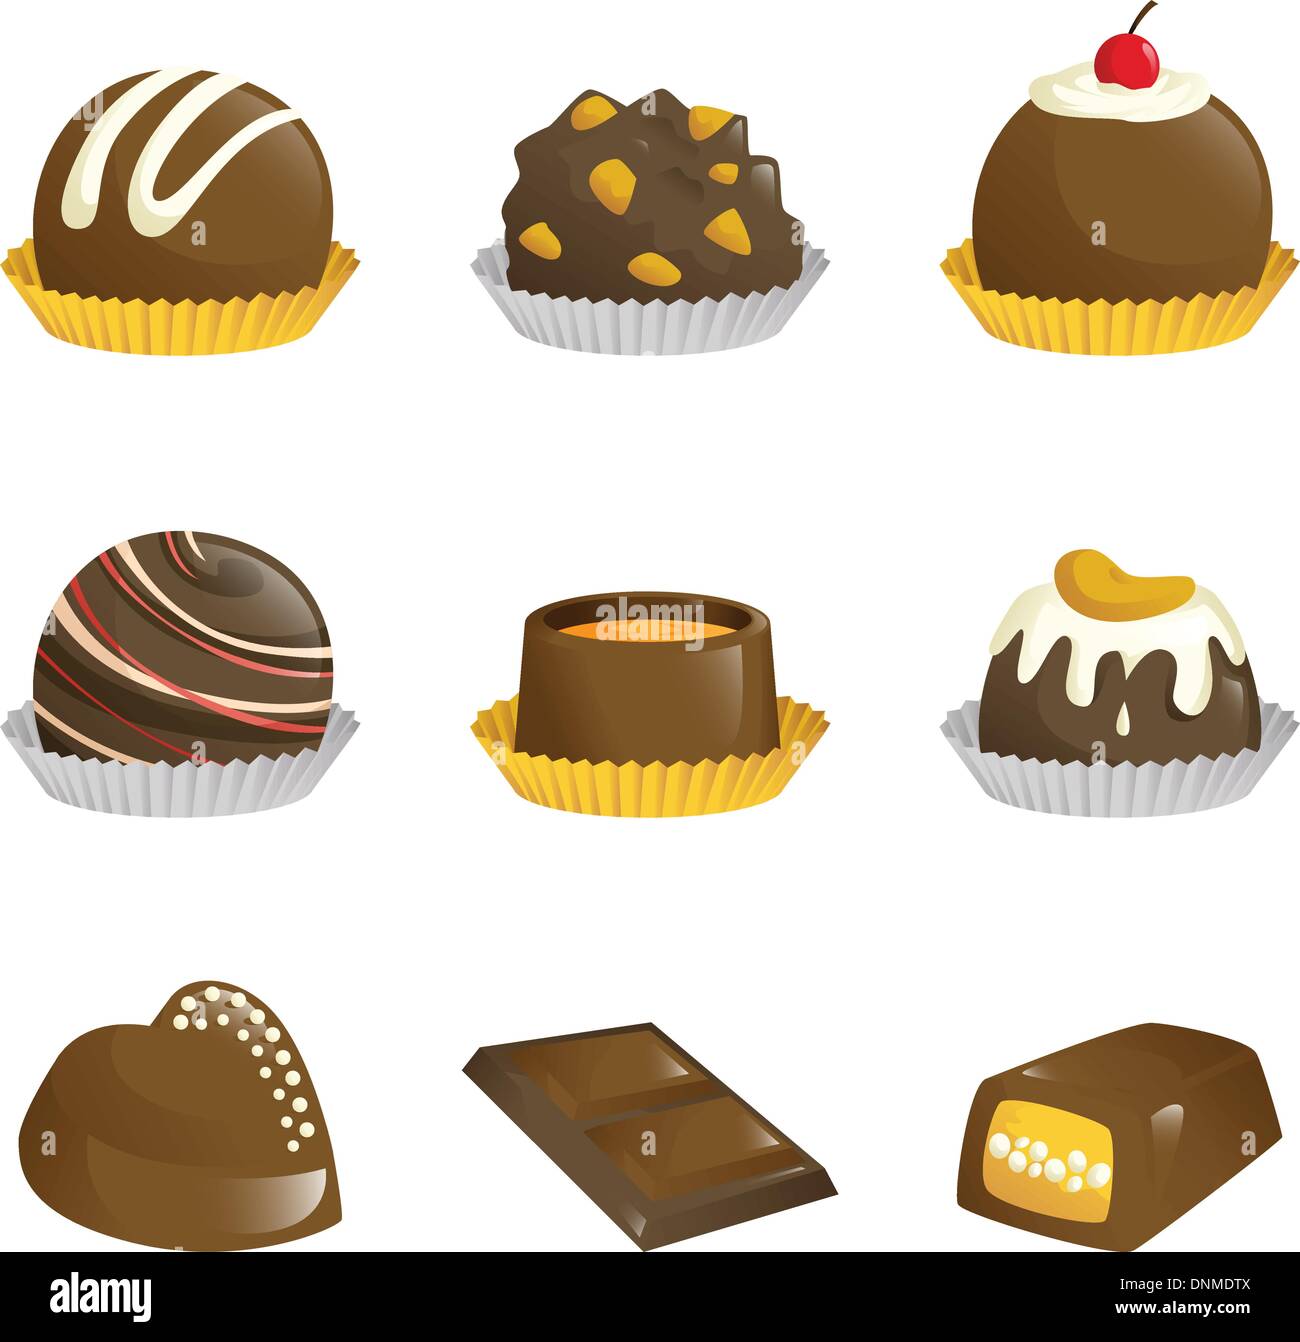 A vector illustration of different kinds of chocolates icons Stock Vector